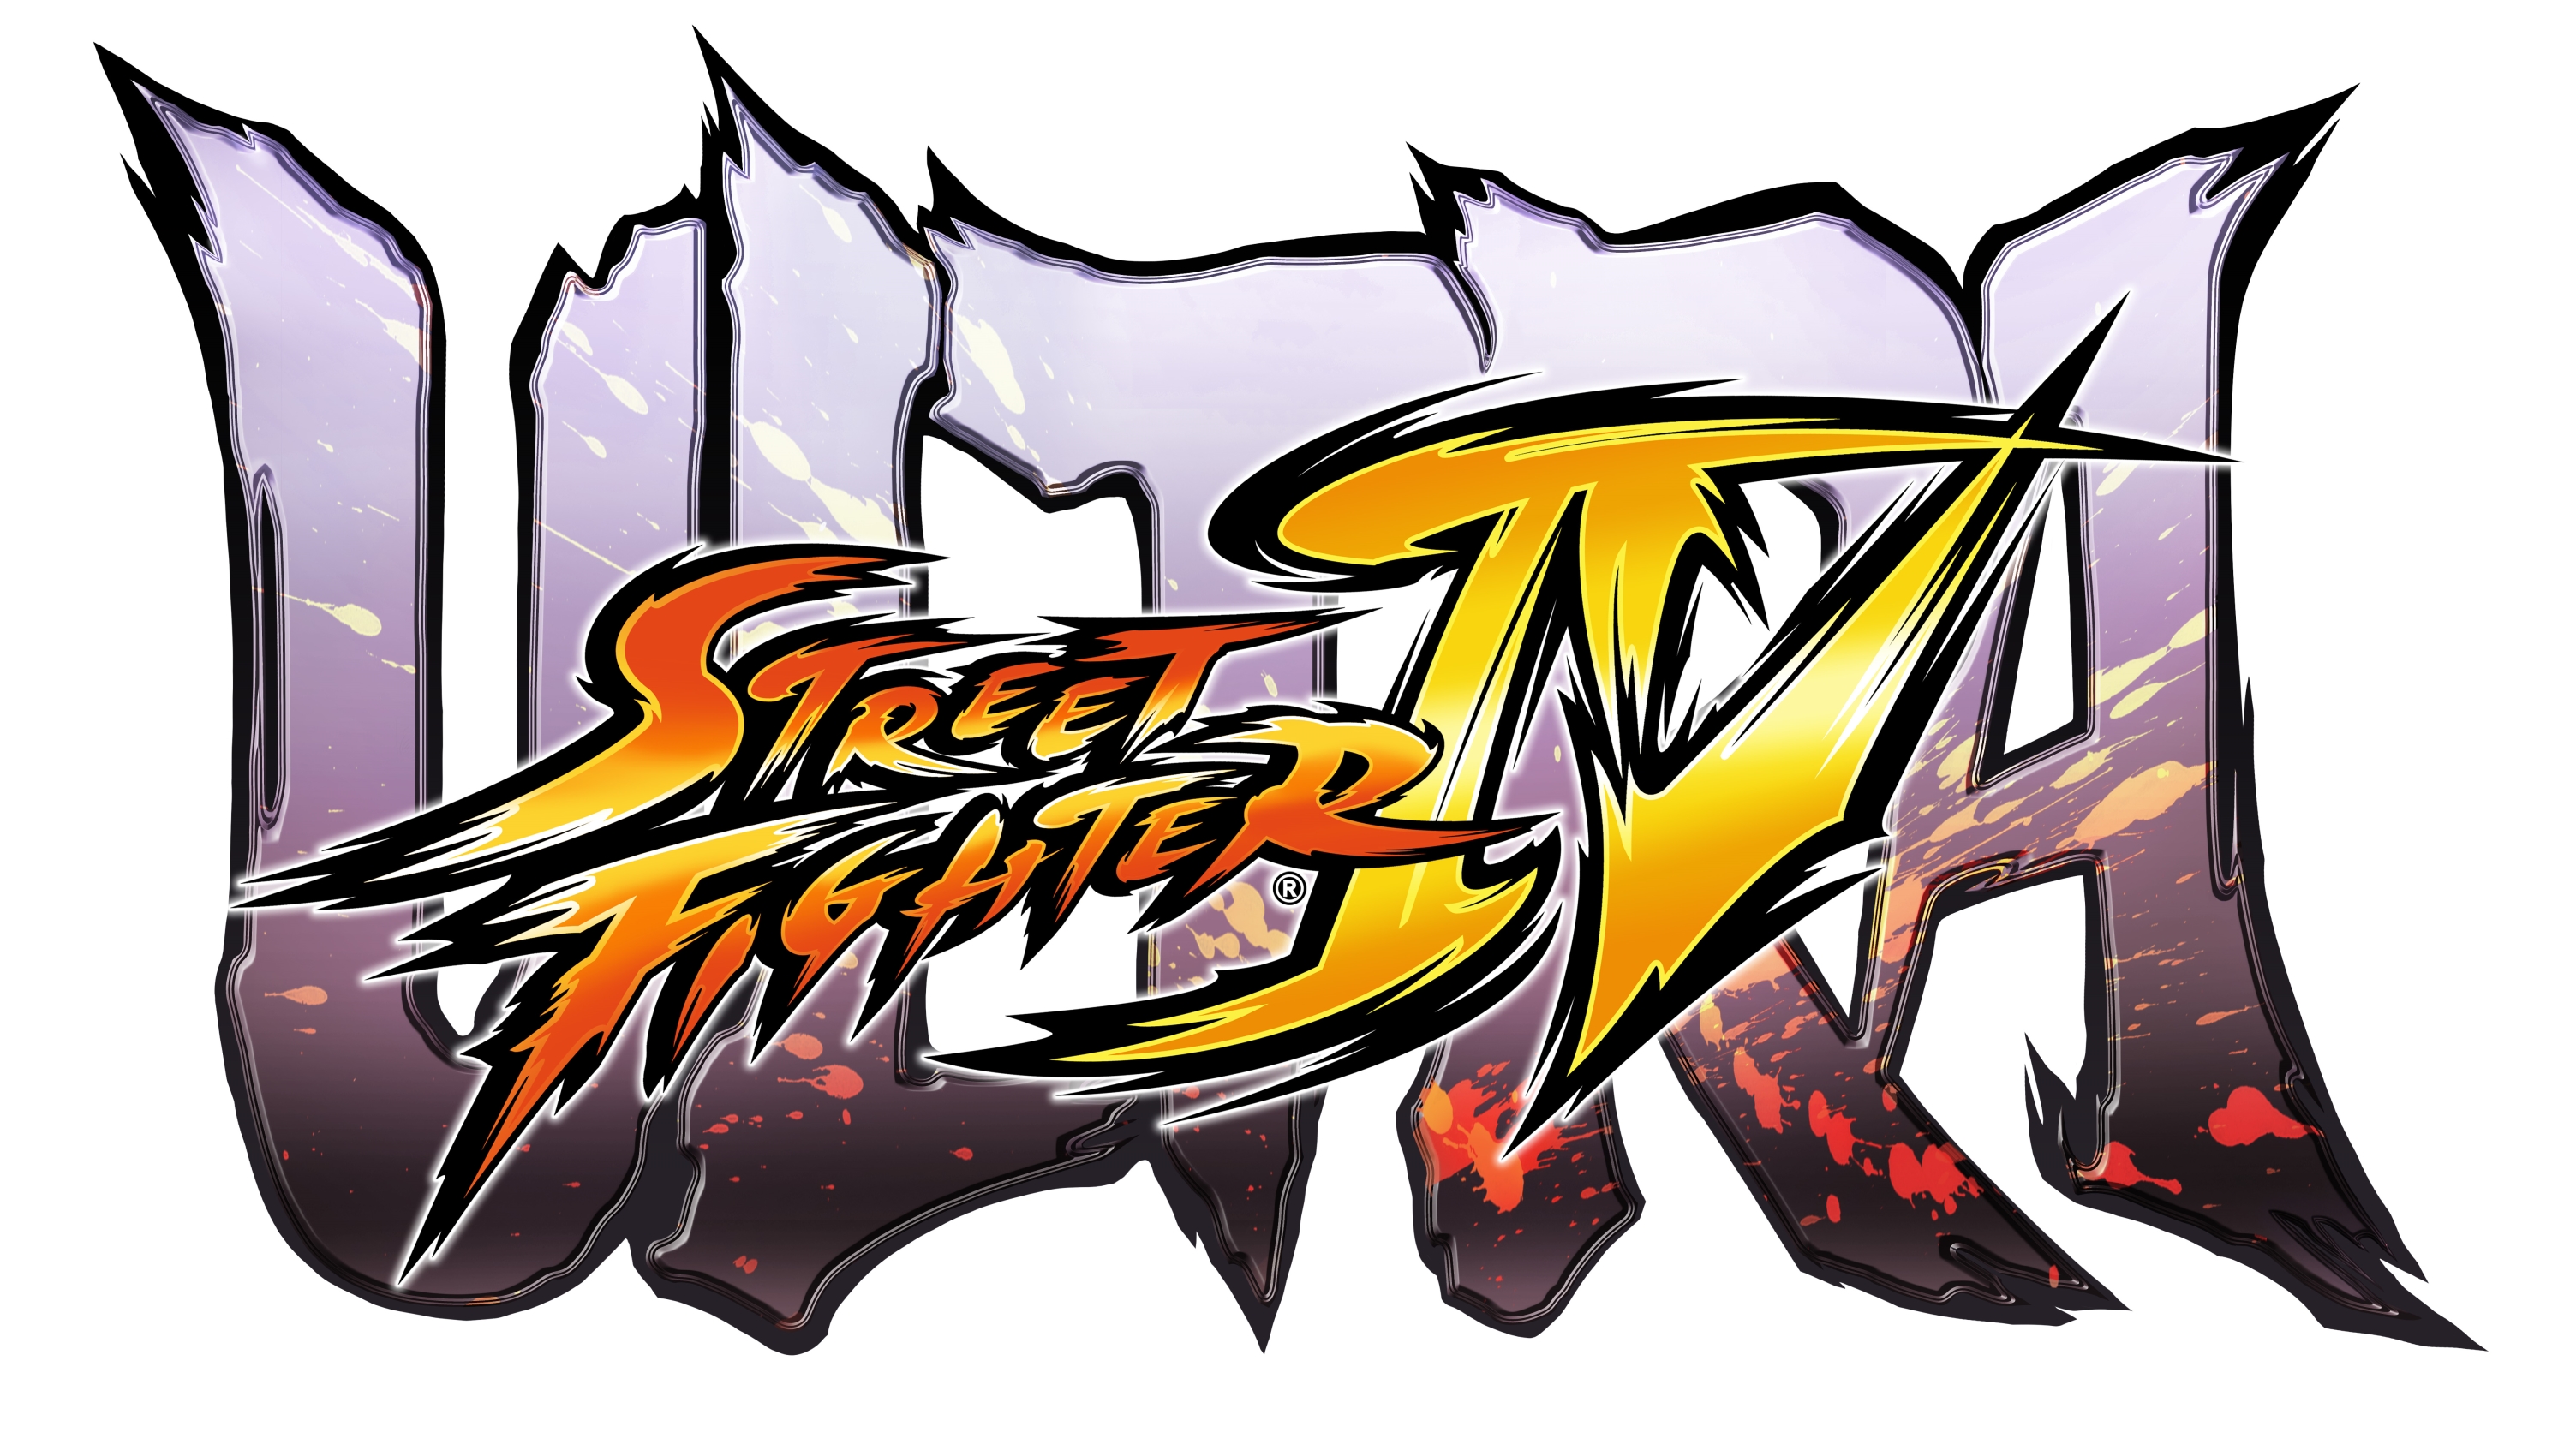 Ultra Street Fighter 4 - TFG Review / Artwork Gallery